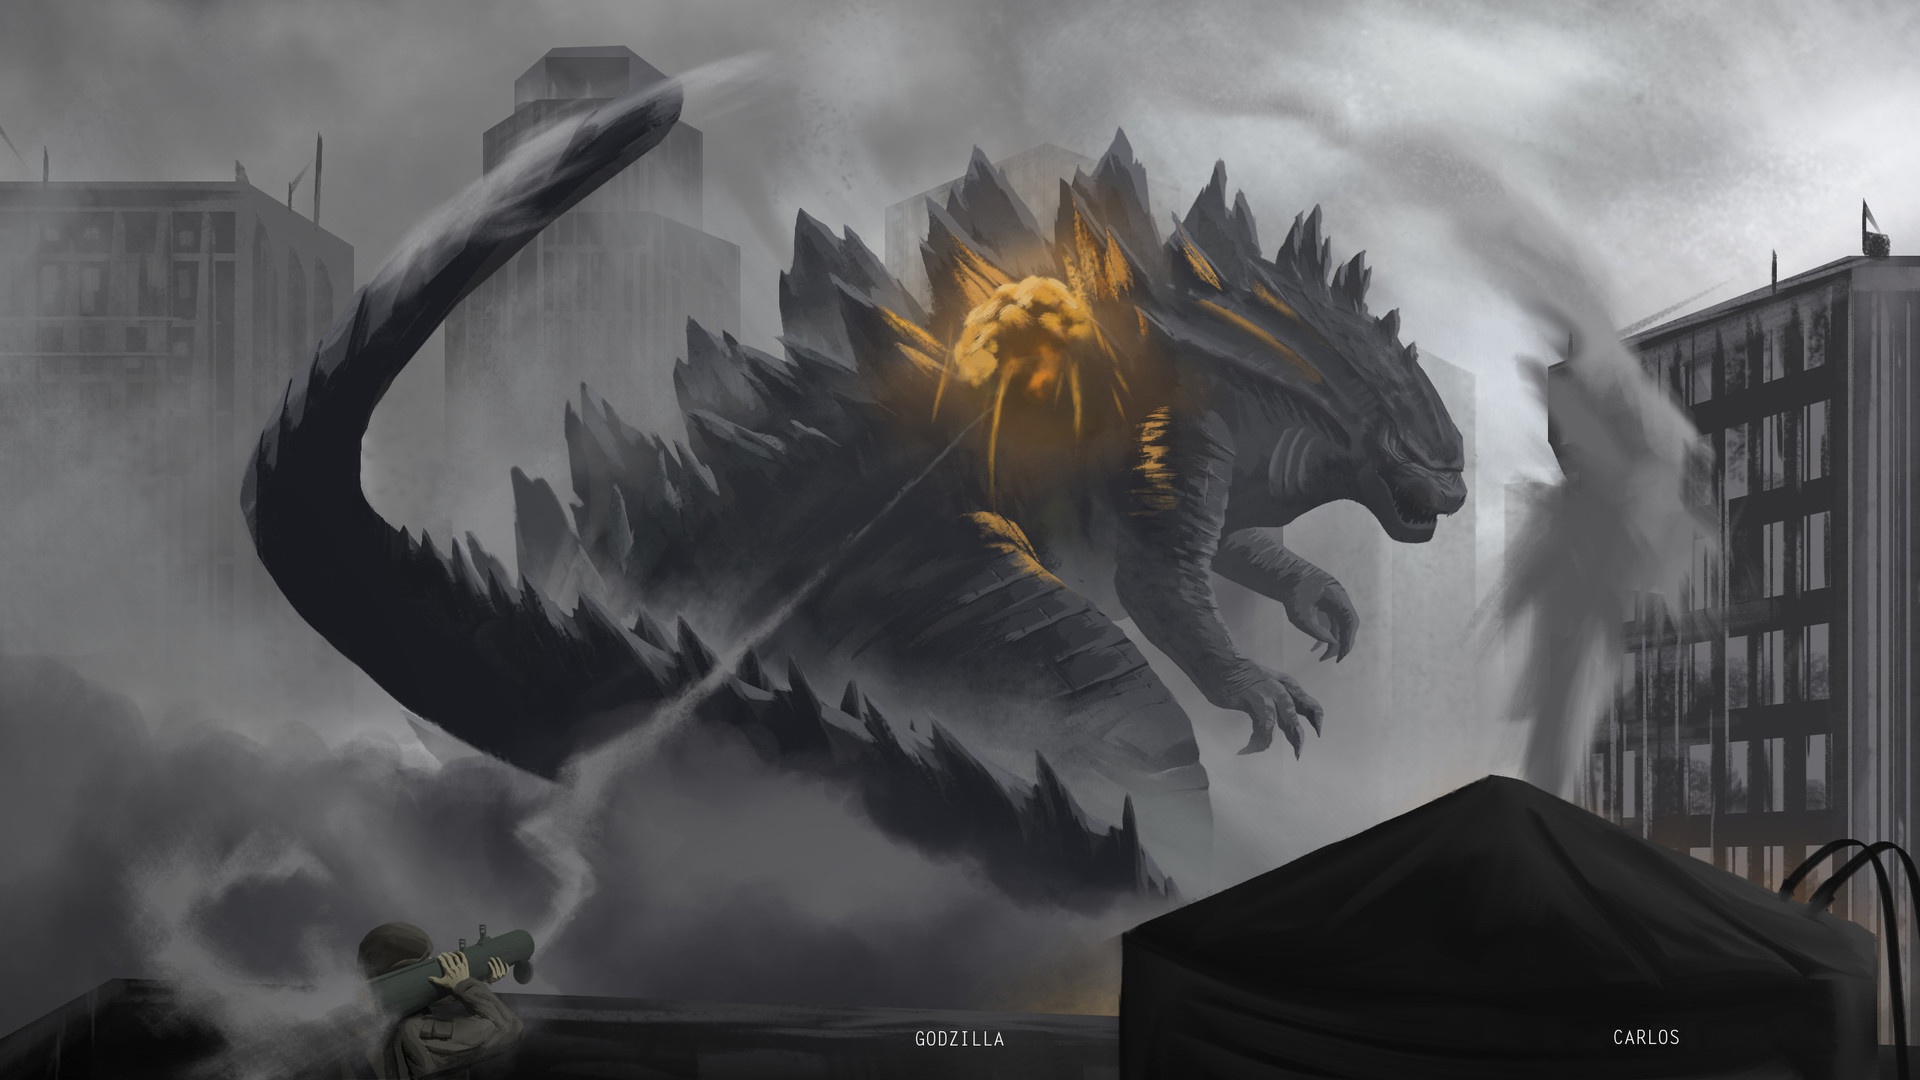 General 1920x1080 Carlos Alan creature Godzilla digital art caption watermarked kaiju text building spikes claws tail rocket launchers weapon lying down lying on front open mouth pointy teeth smoke